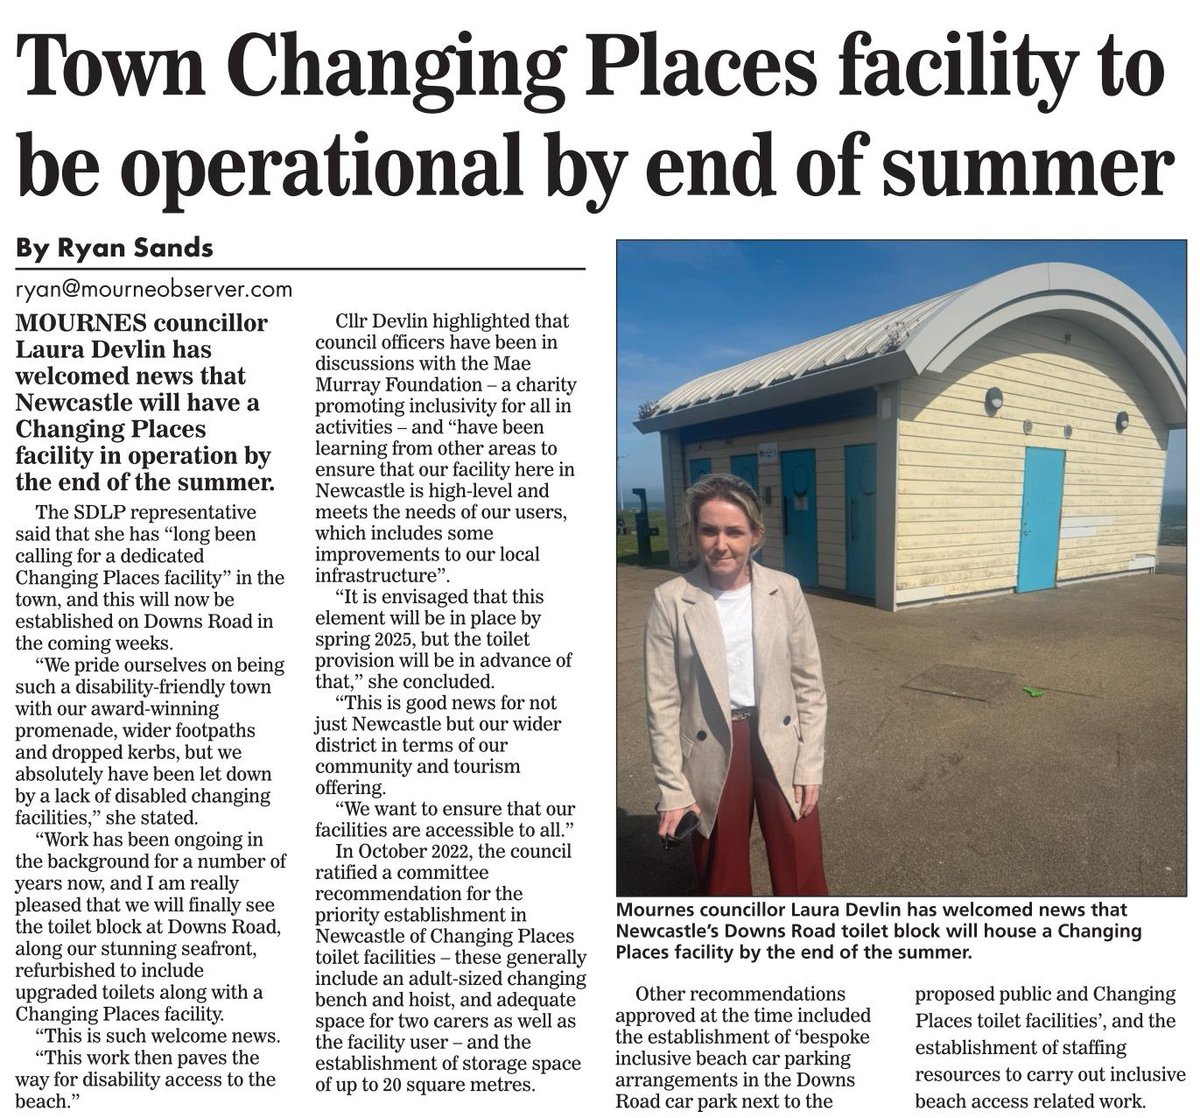 🚾#ChangingPlaces toilets Newcastle will be open by the end of the Summer! The installation of this will also pave the way for new disability access to the beach. Well done @LauraDevlinSDLP on getting this delivered! 🐚 @SDLPLive | @Chris_McClem | @KylaHollywood | @castleDD